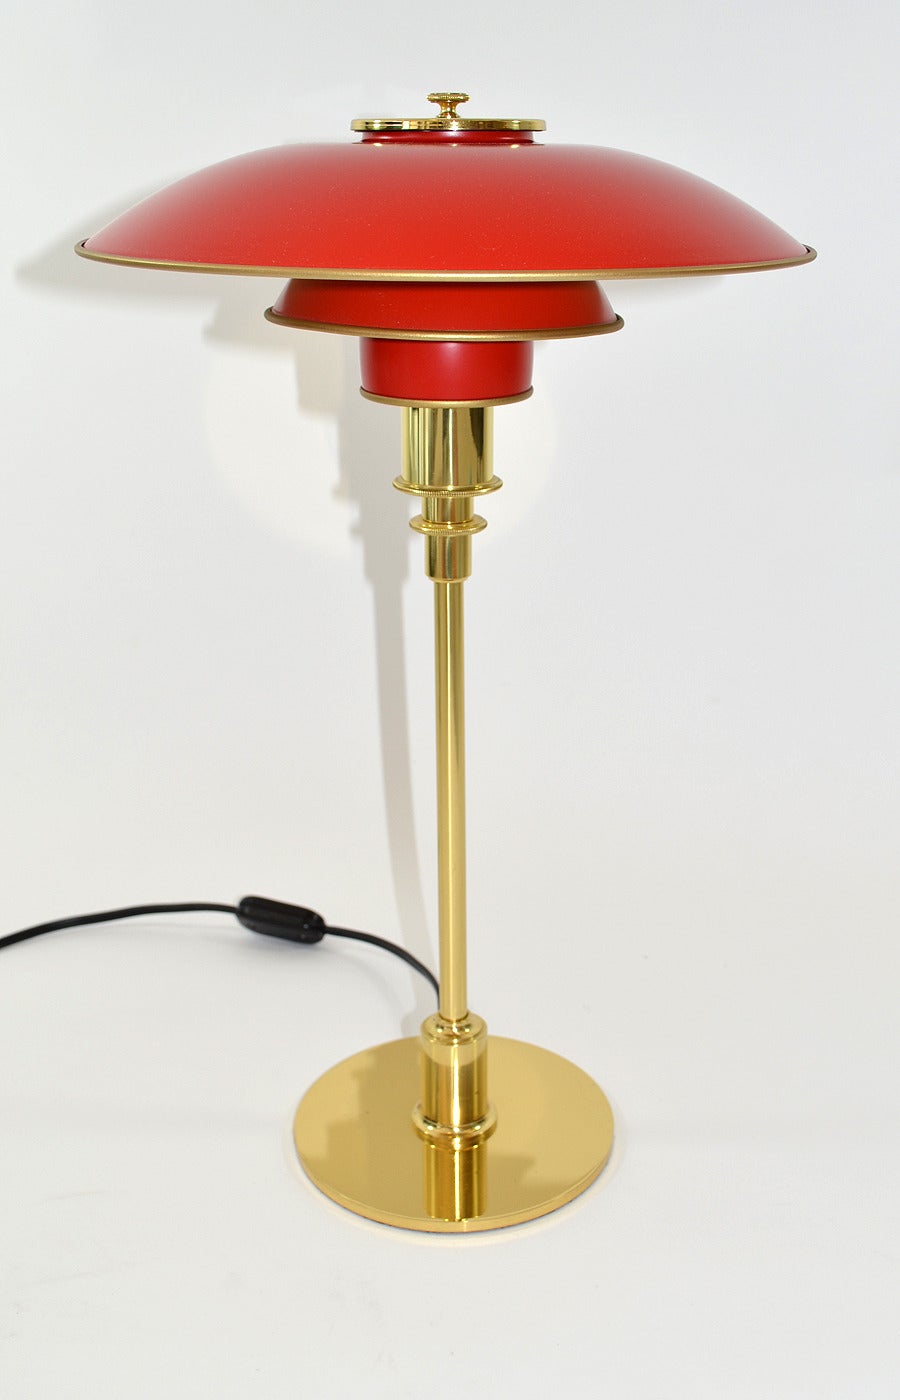 Signed and labeled Poul Henningsen PH 3/2 table or desk lamp by Louis Poulsen. Red enameled copper shades on polished brass stem, foot and socket cover. Louis Poulsen labels. Designed 1929. Late 20th century production.